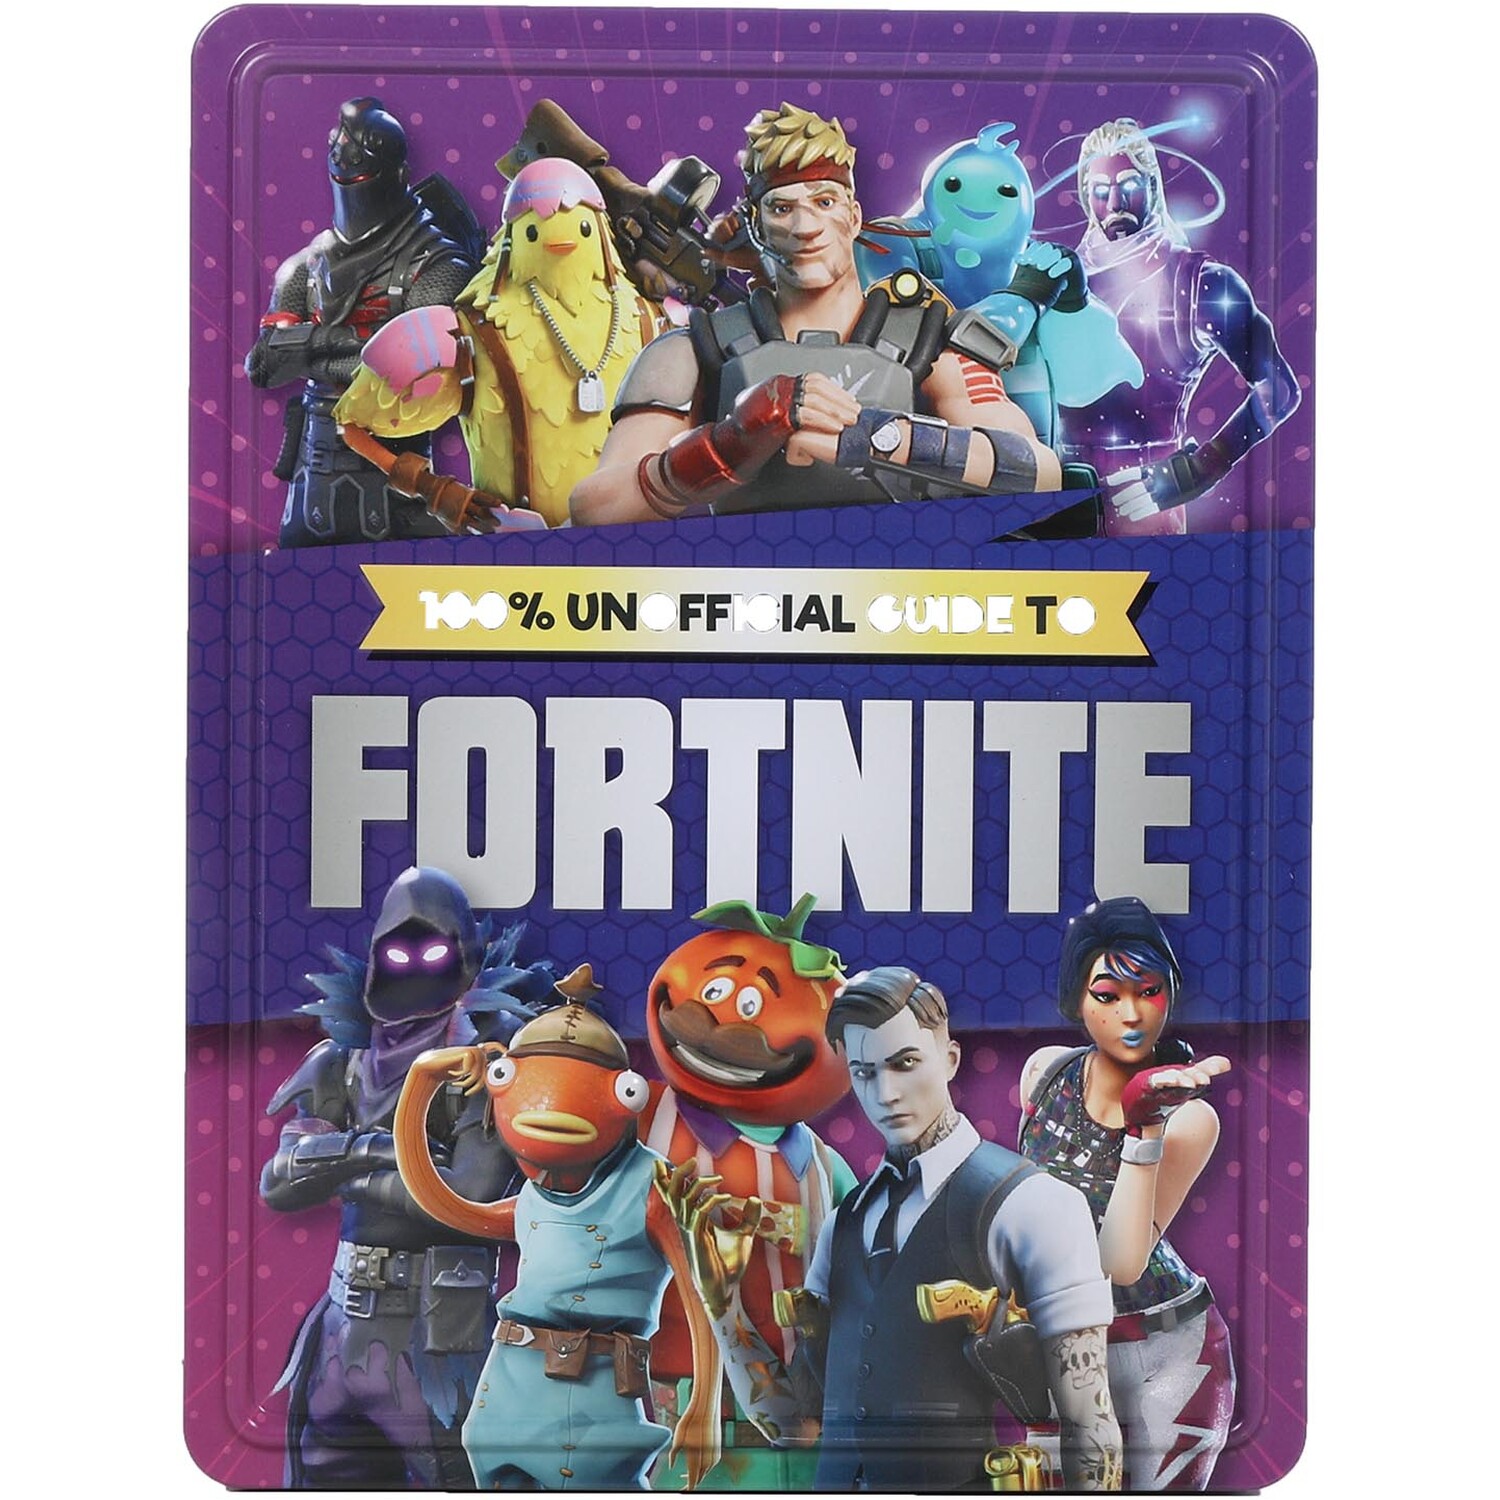 Unofficial Guide to Fortnite Tin of Books Image